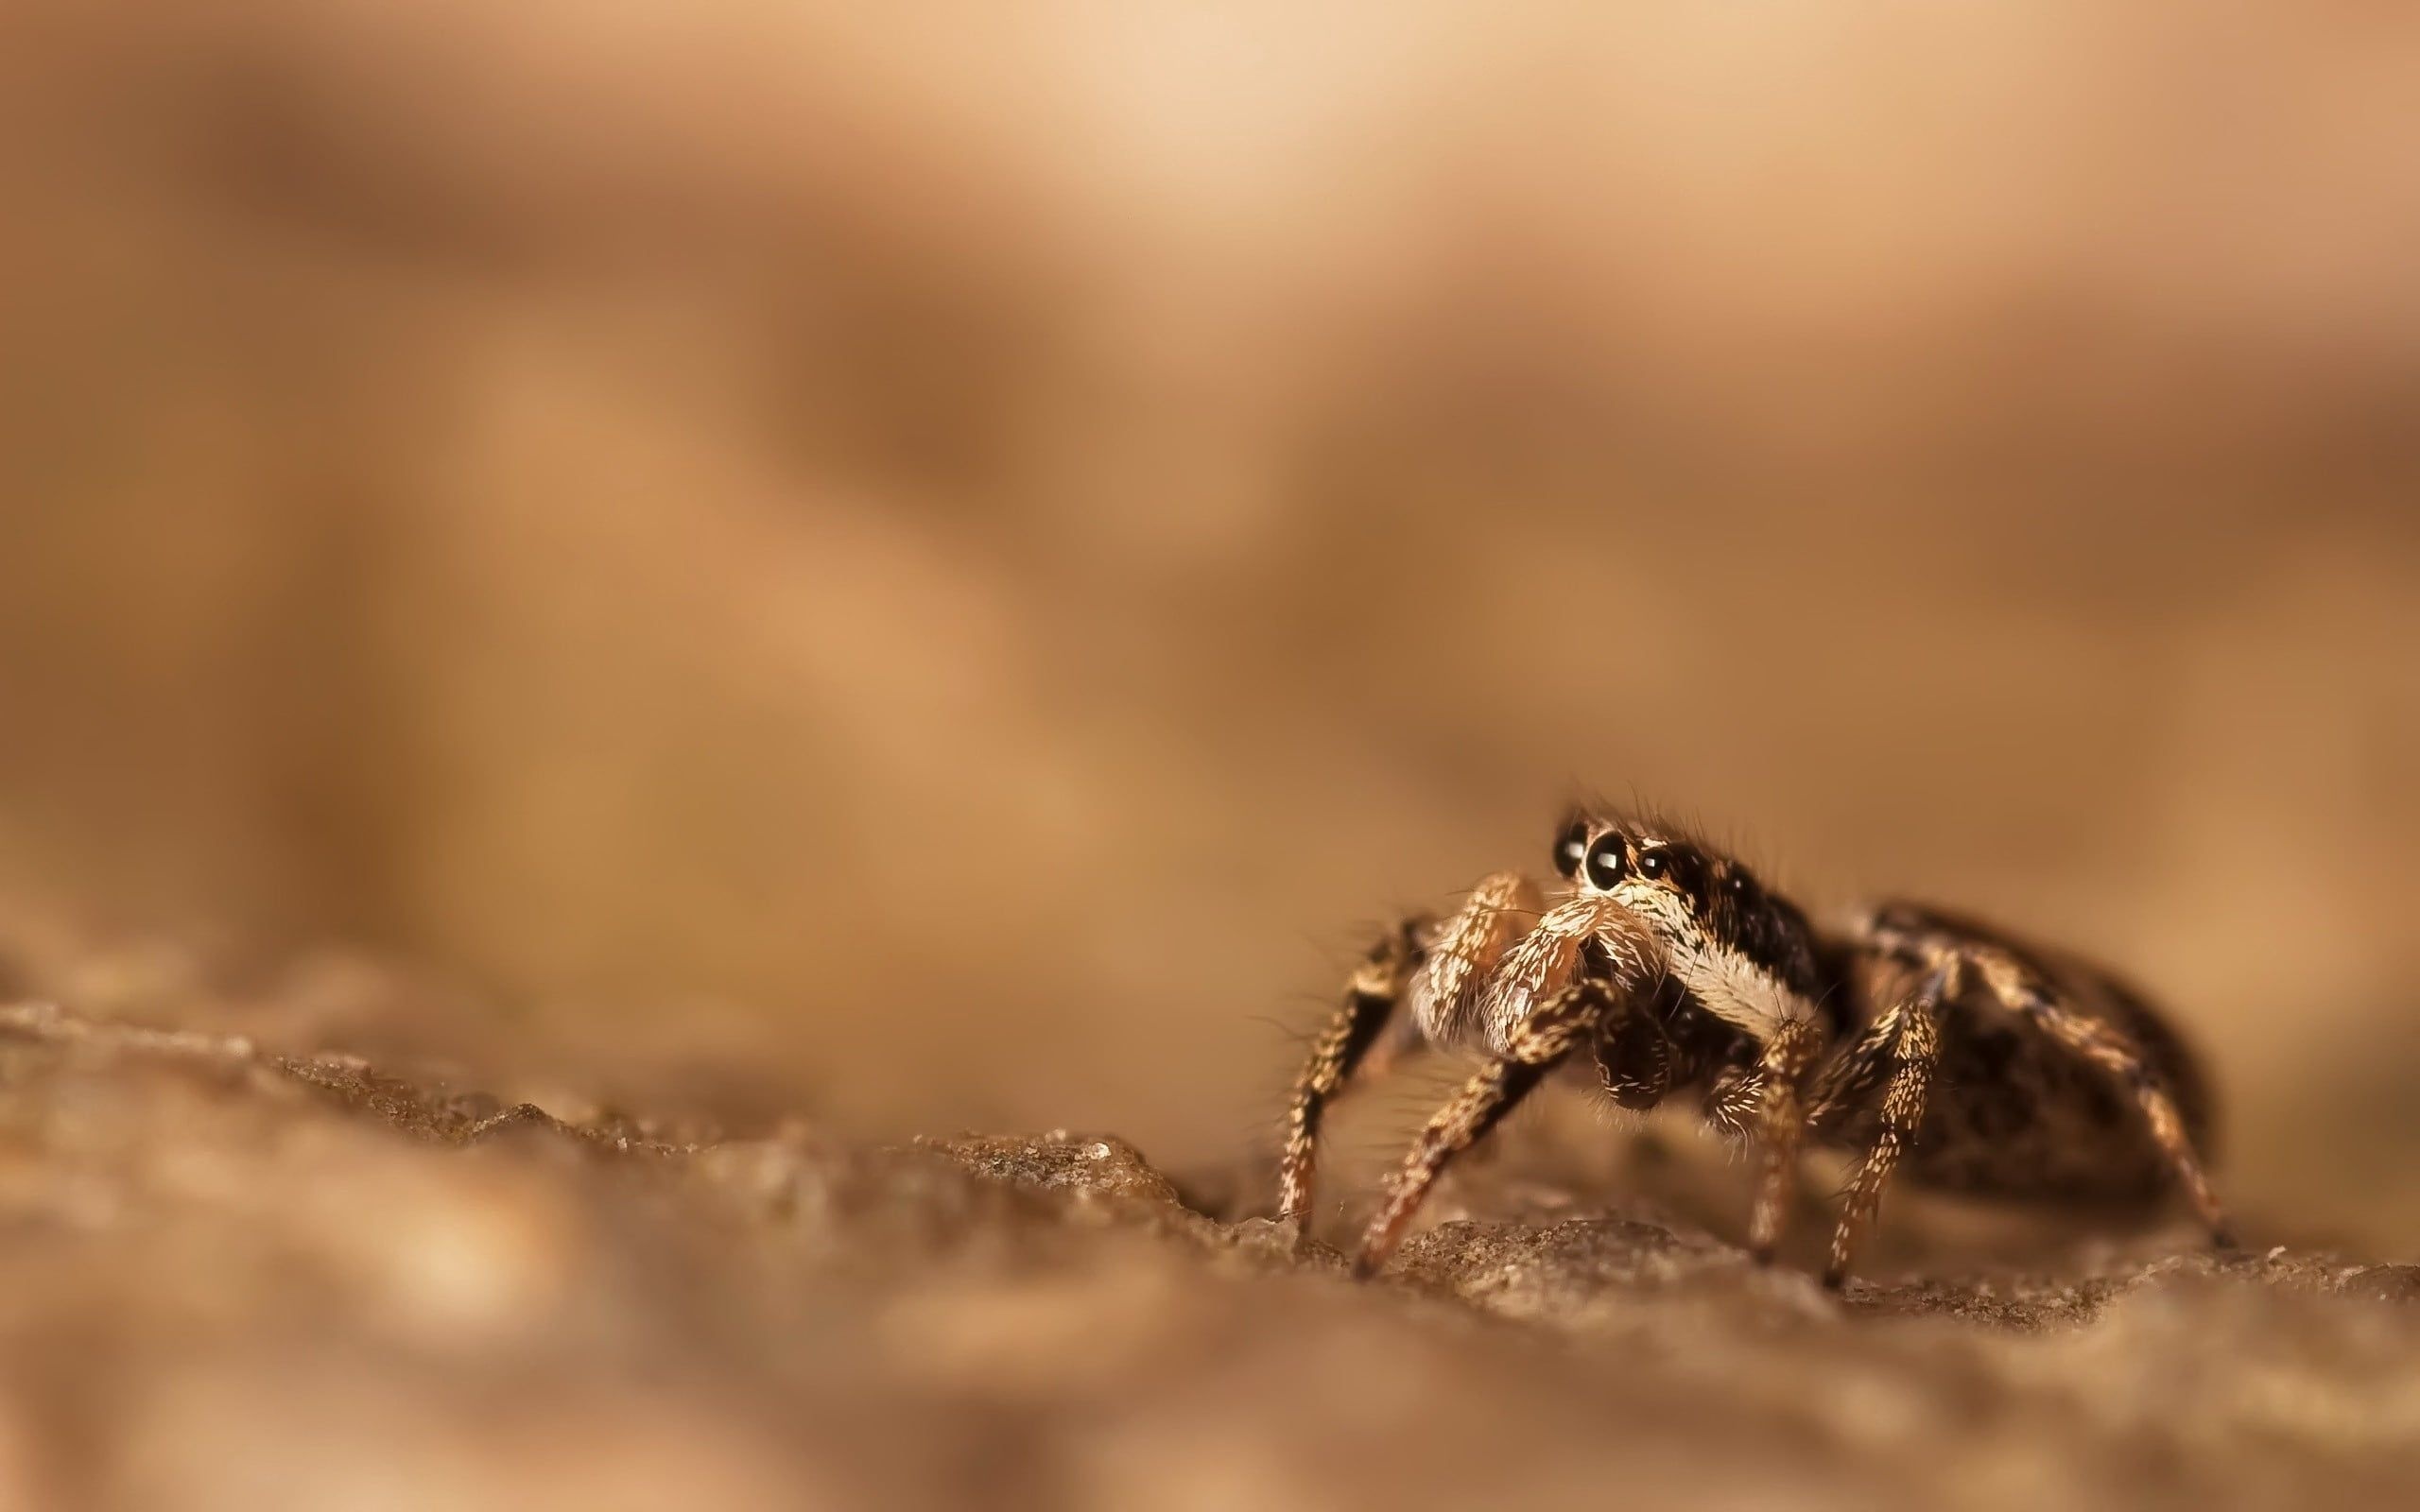 Brown spider wallpaper, Spider insect, Surface glare, Animal close-up, 2560x1600 HD Desktop